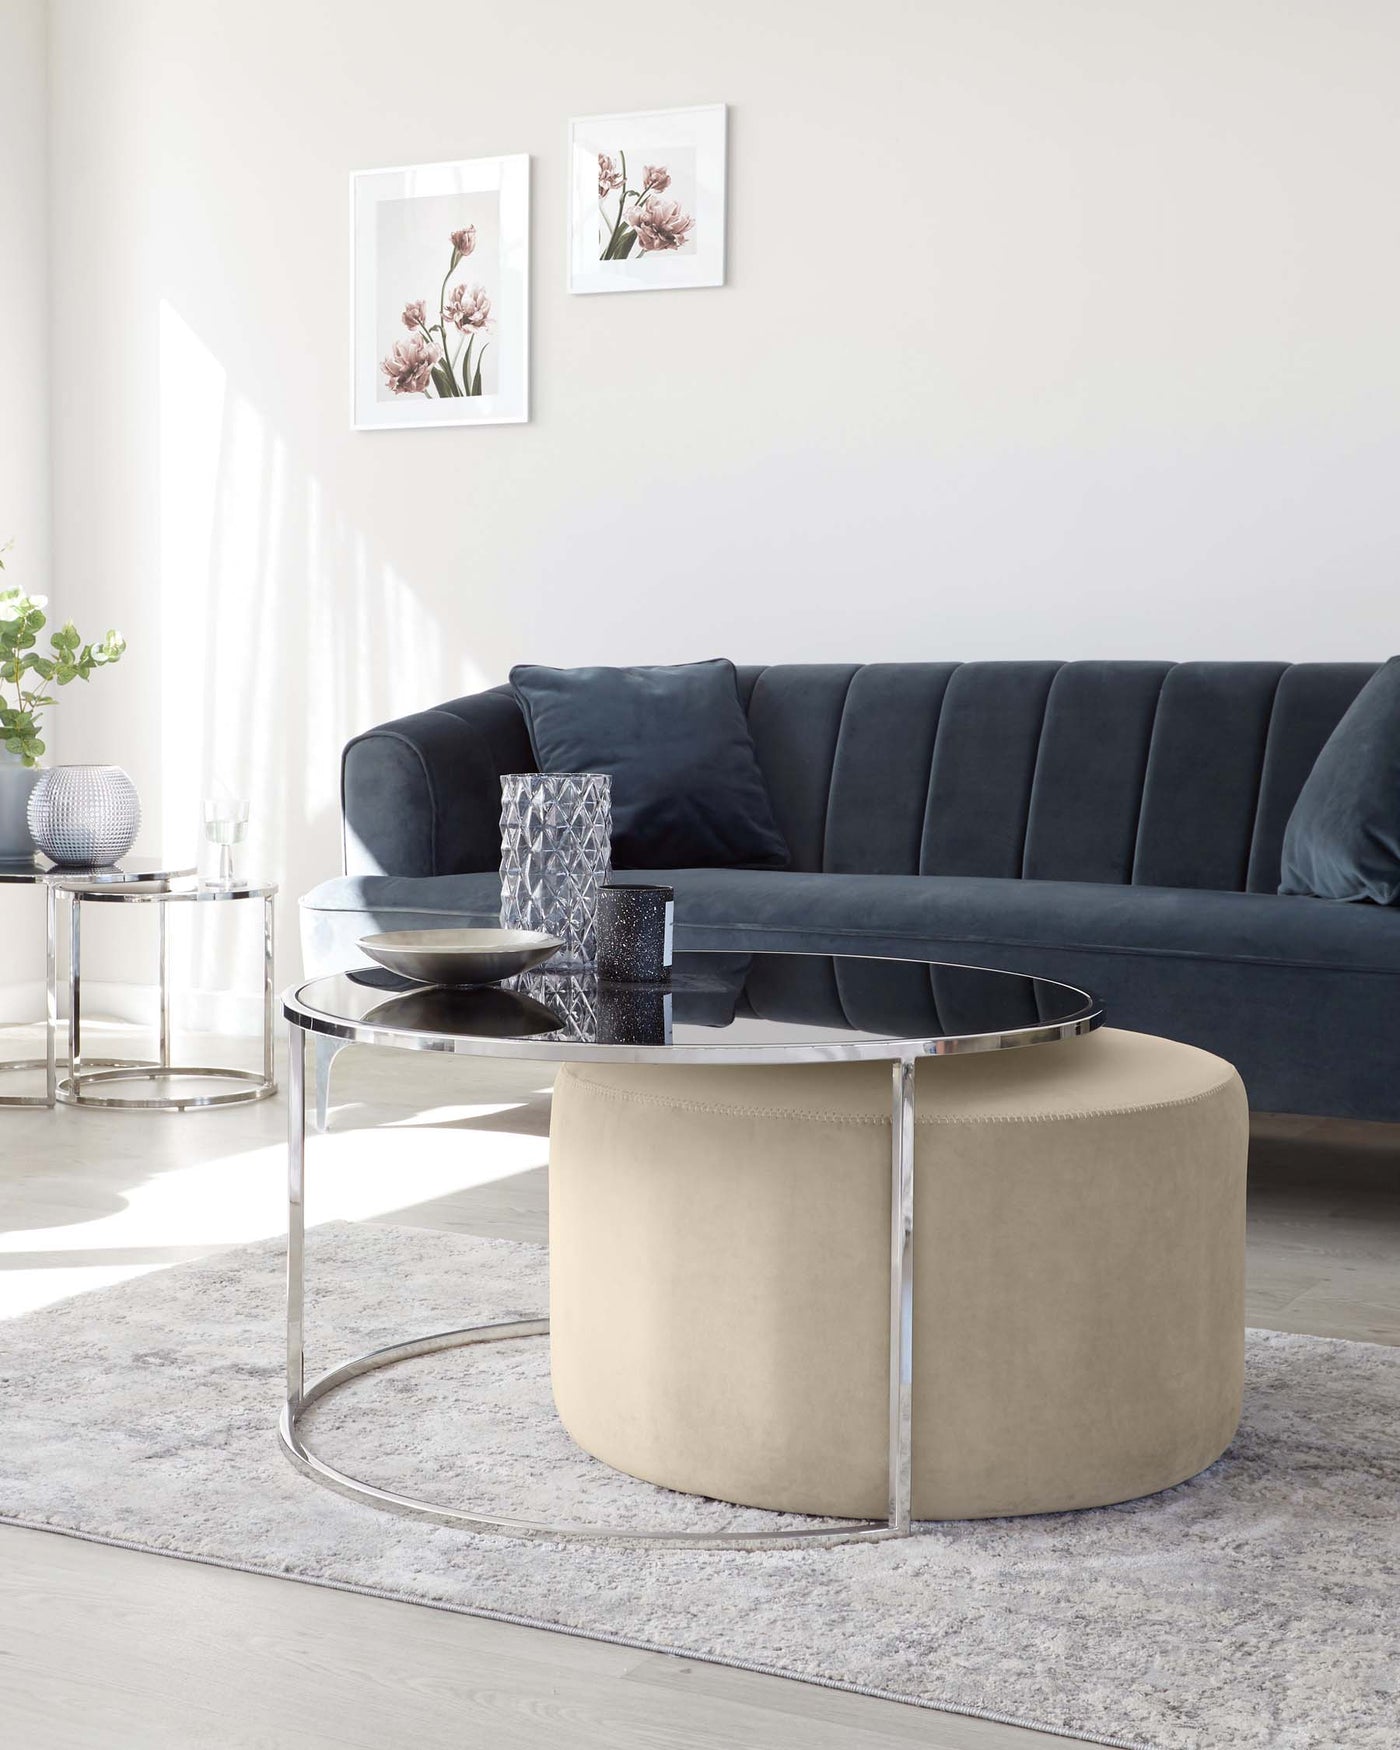 Thea Round Coffee Table & Champagne Pouffe